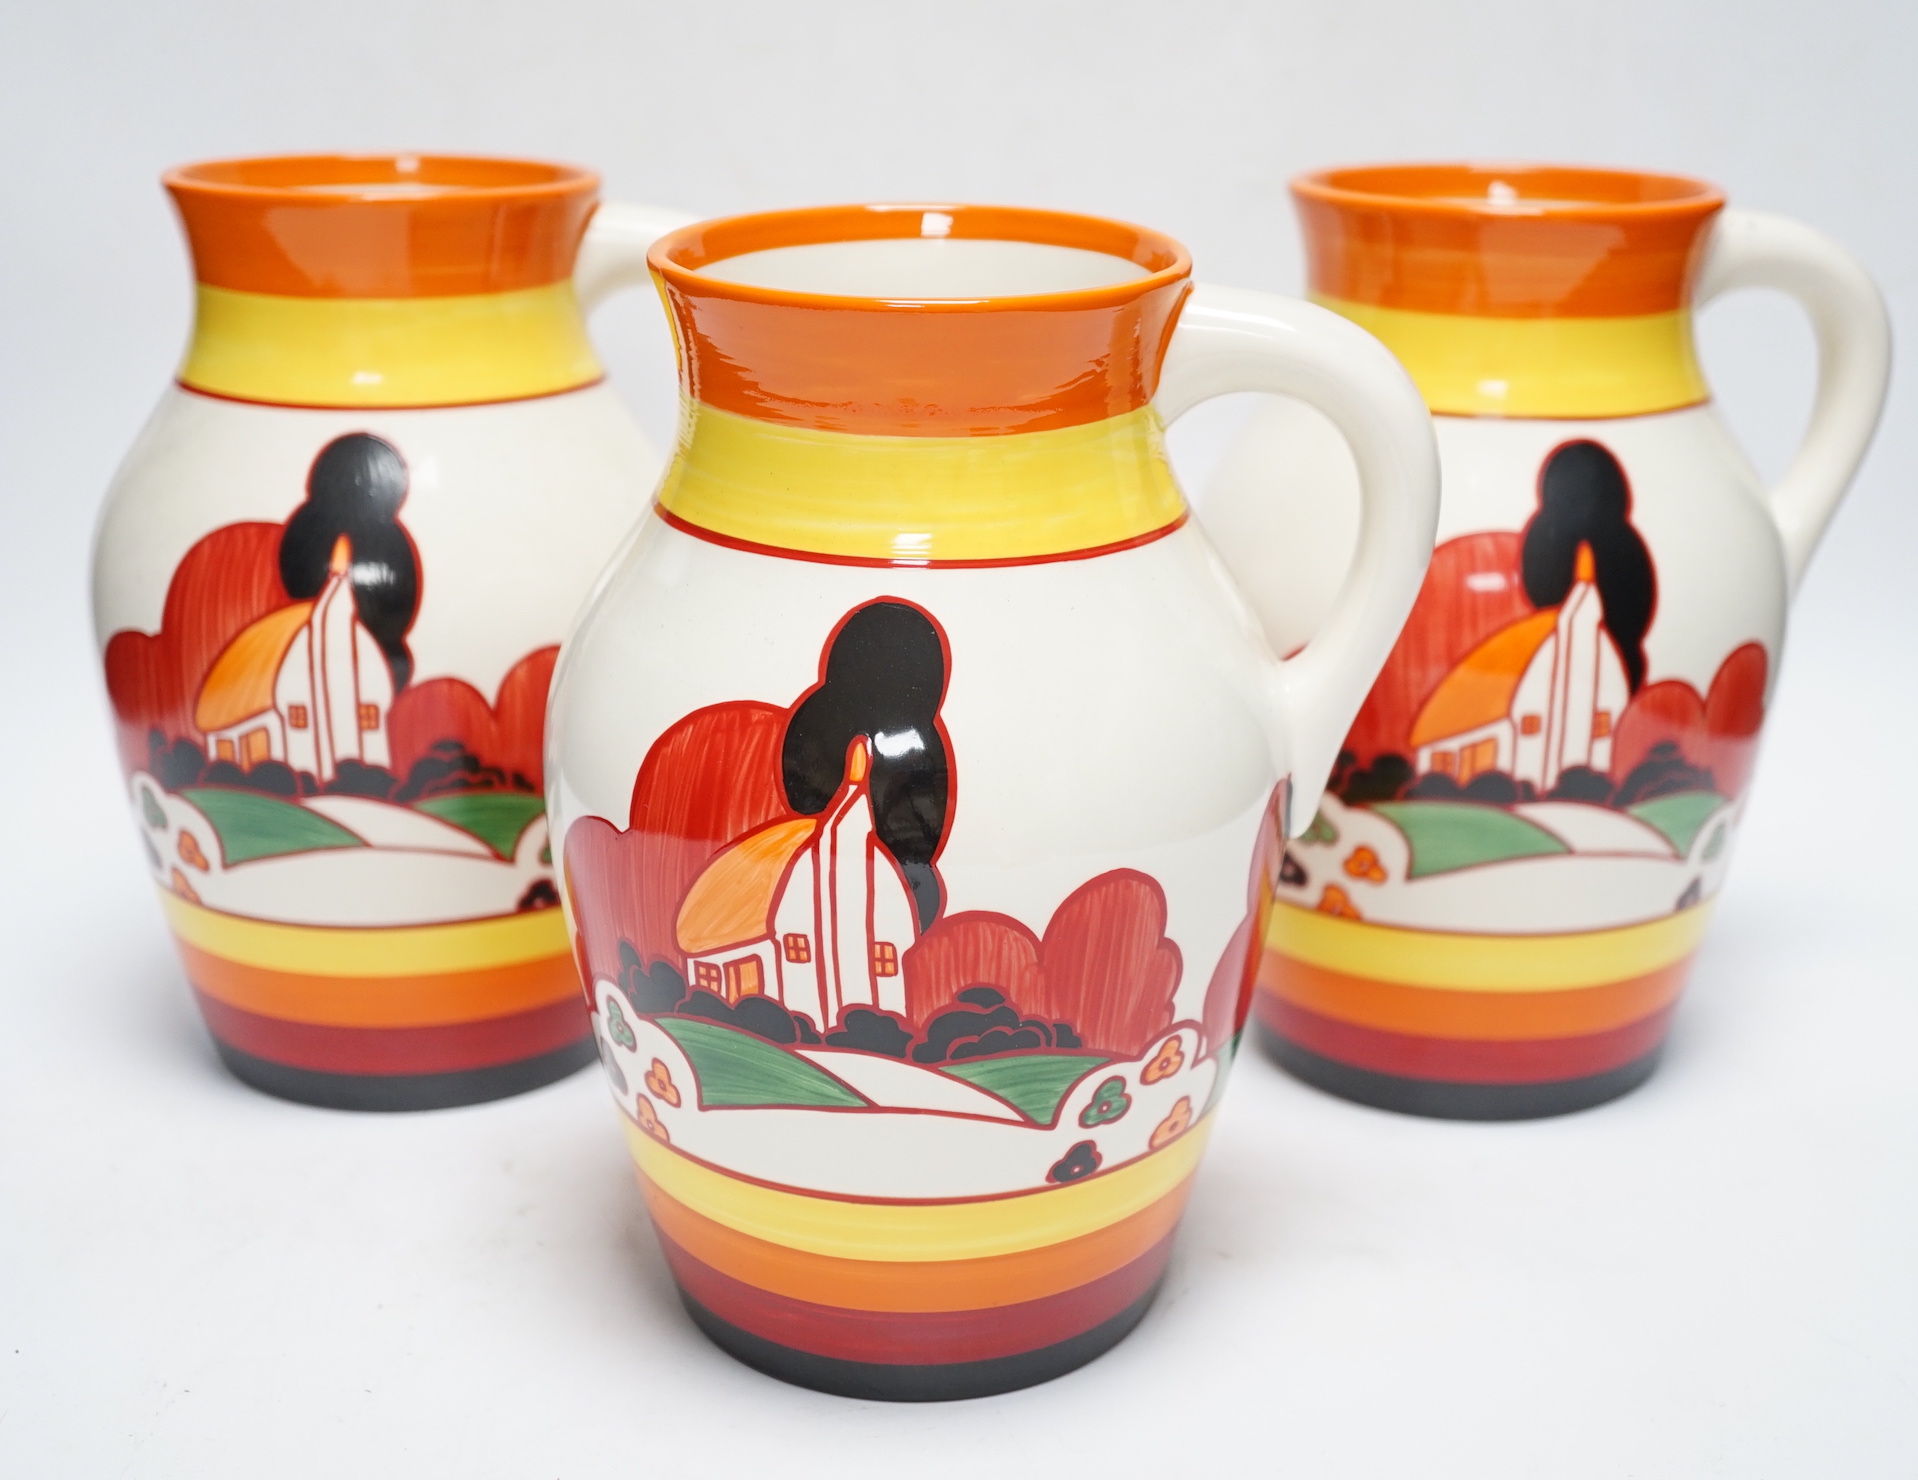 Three Wedgwood Bizarre Clarice Cliff Lotus jugs - Farmhouse pattern, limited edition with boxes and certificates, jugs 20cm high